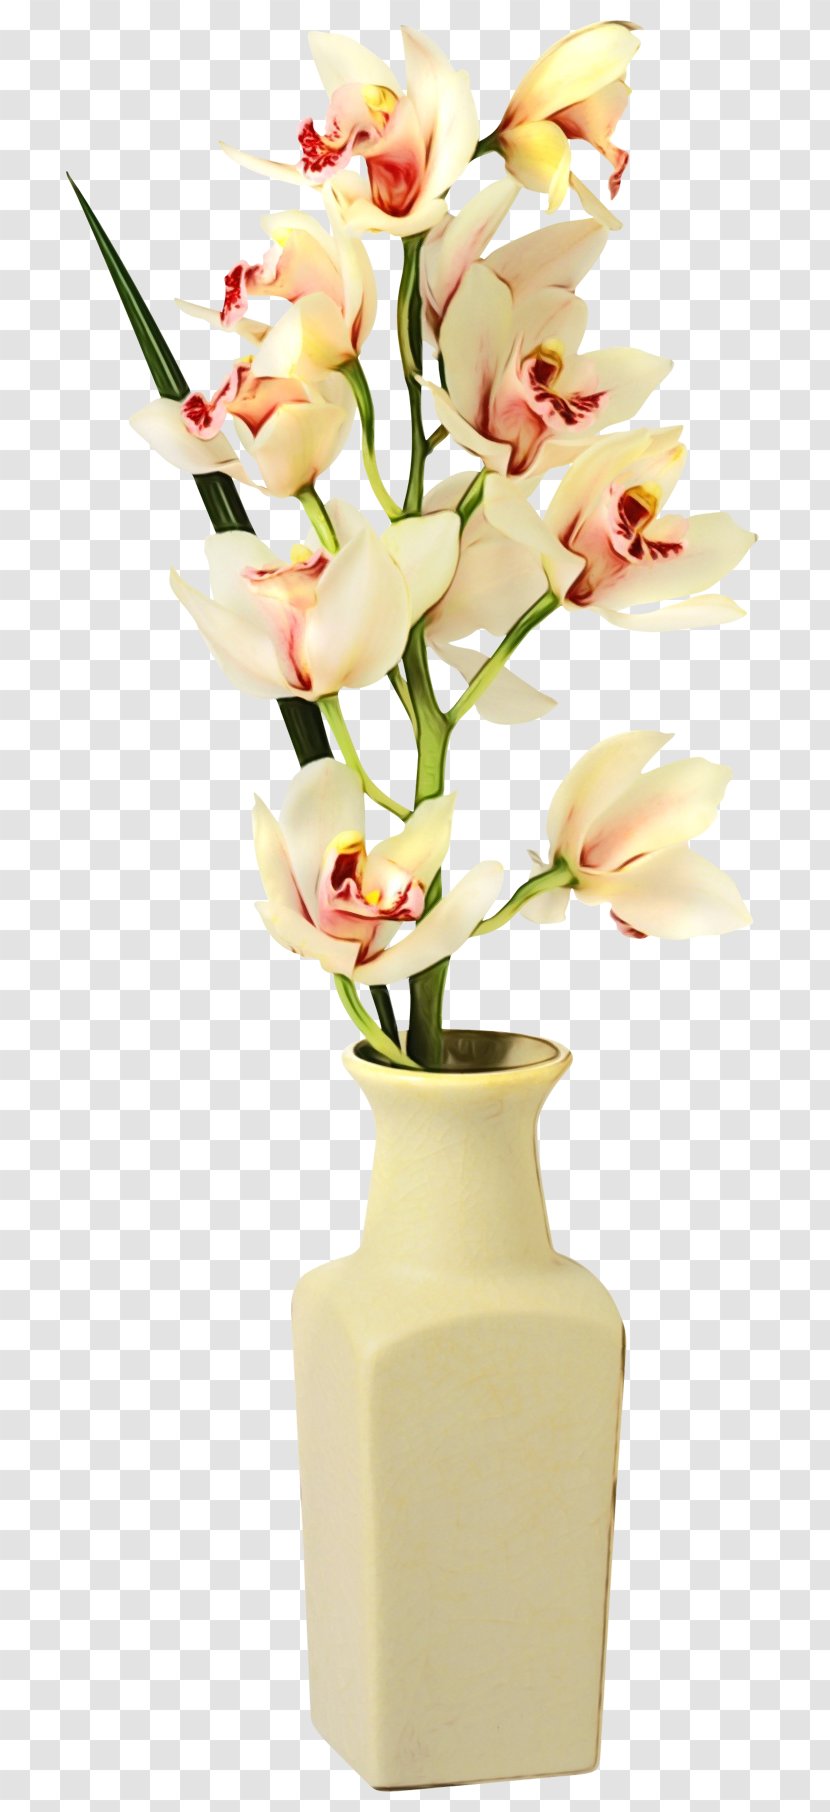 Black And White Flower - Paint - Interior Design Orchid Transparent PNG